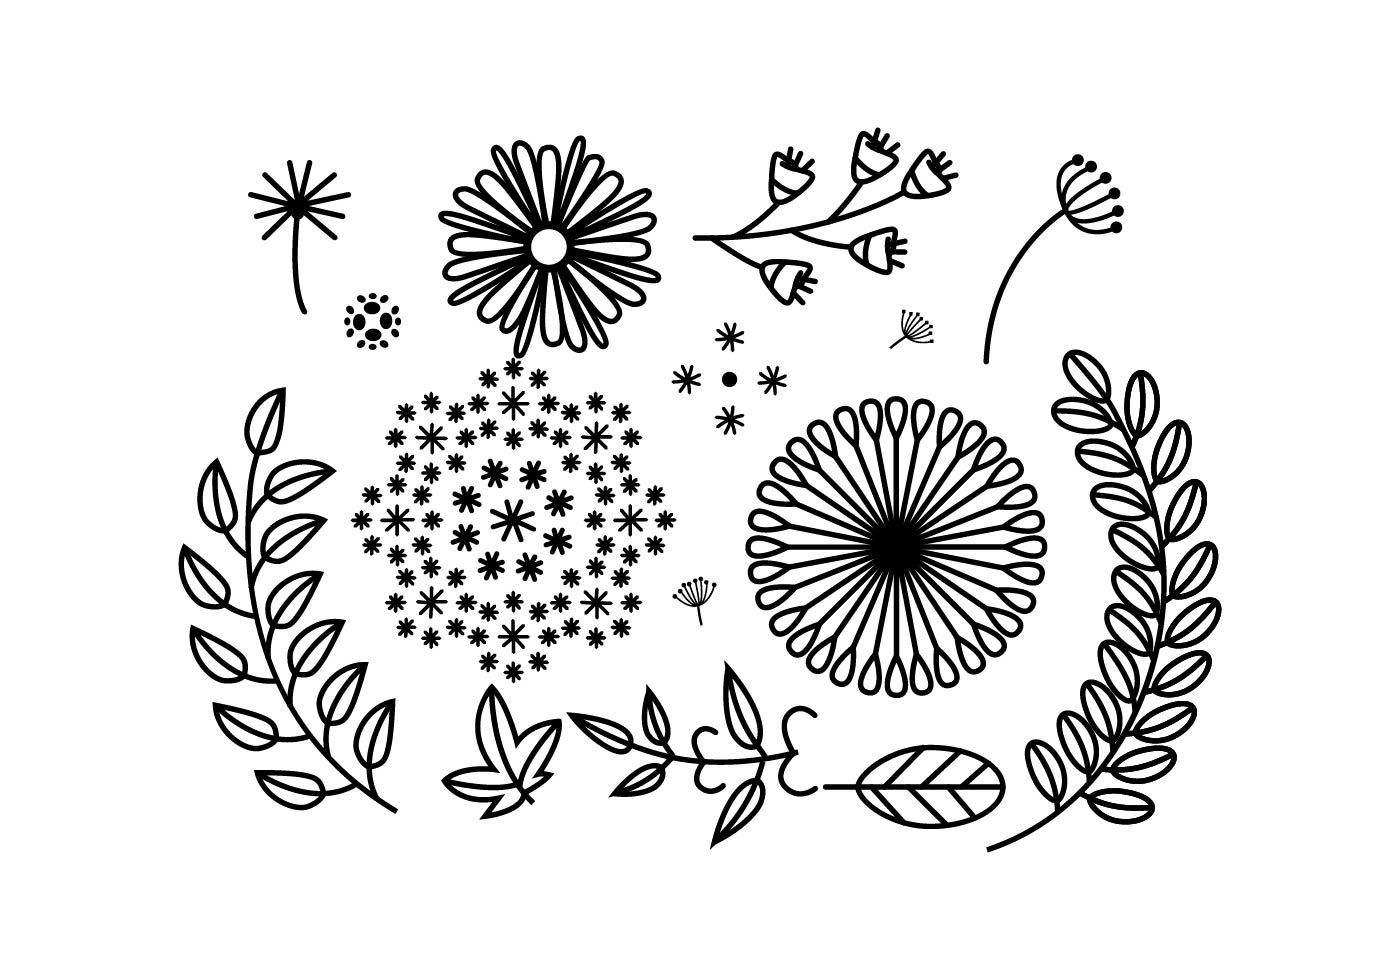 Download Floral Ornament Free Vector Art - (21,615 Free Downloads)